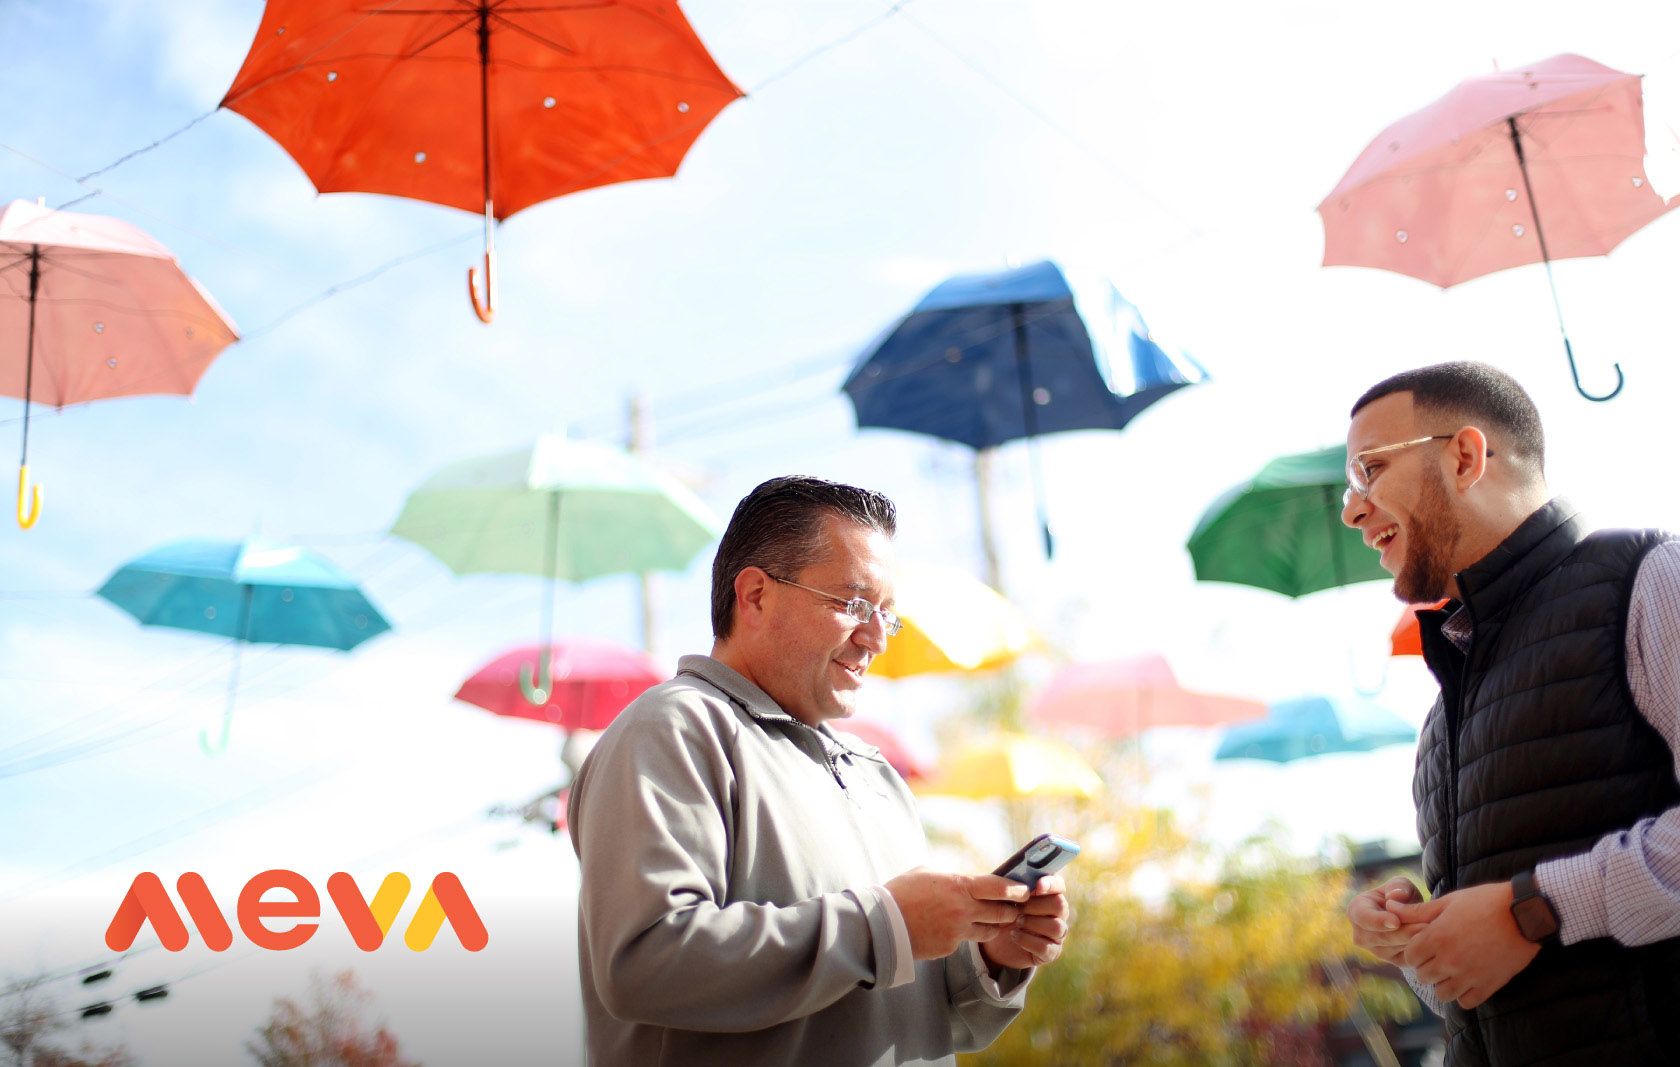 Two men talking in the foreground, colorful umbrellas filed background